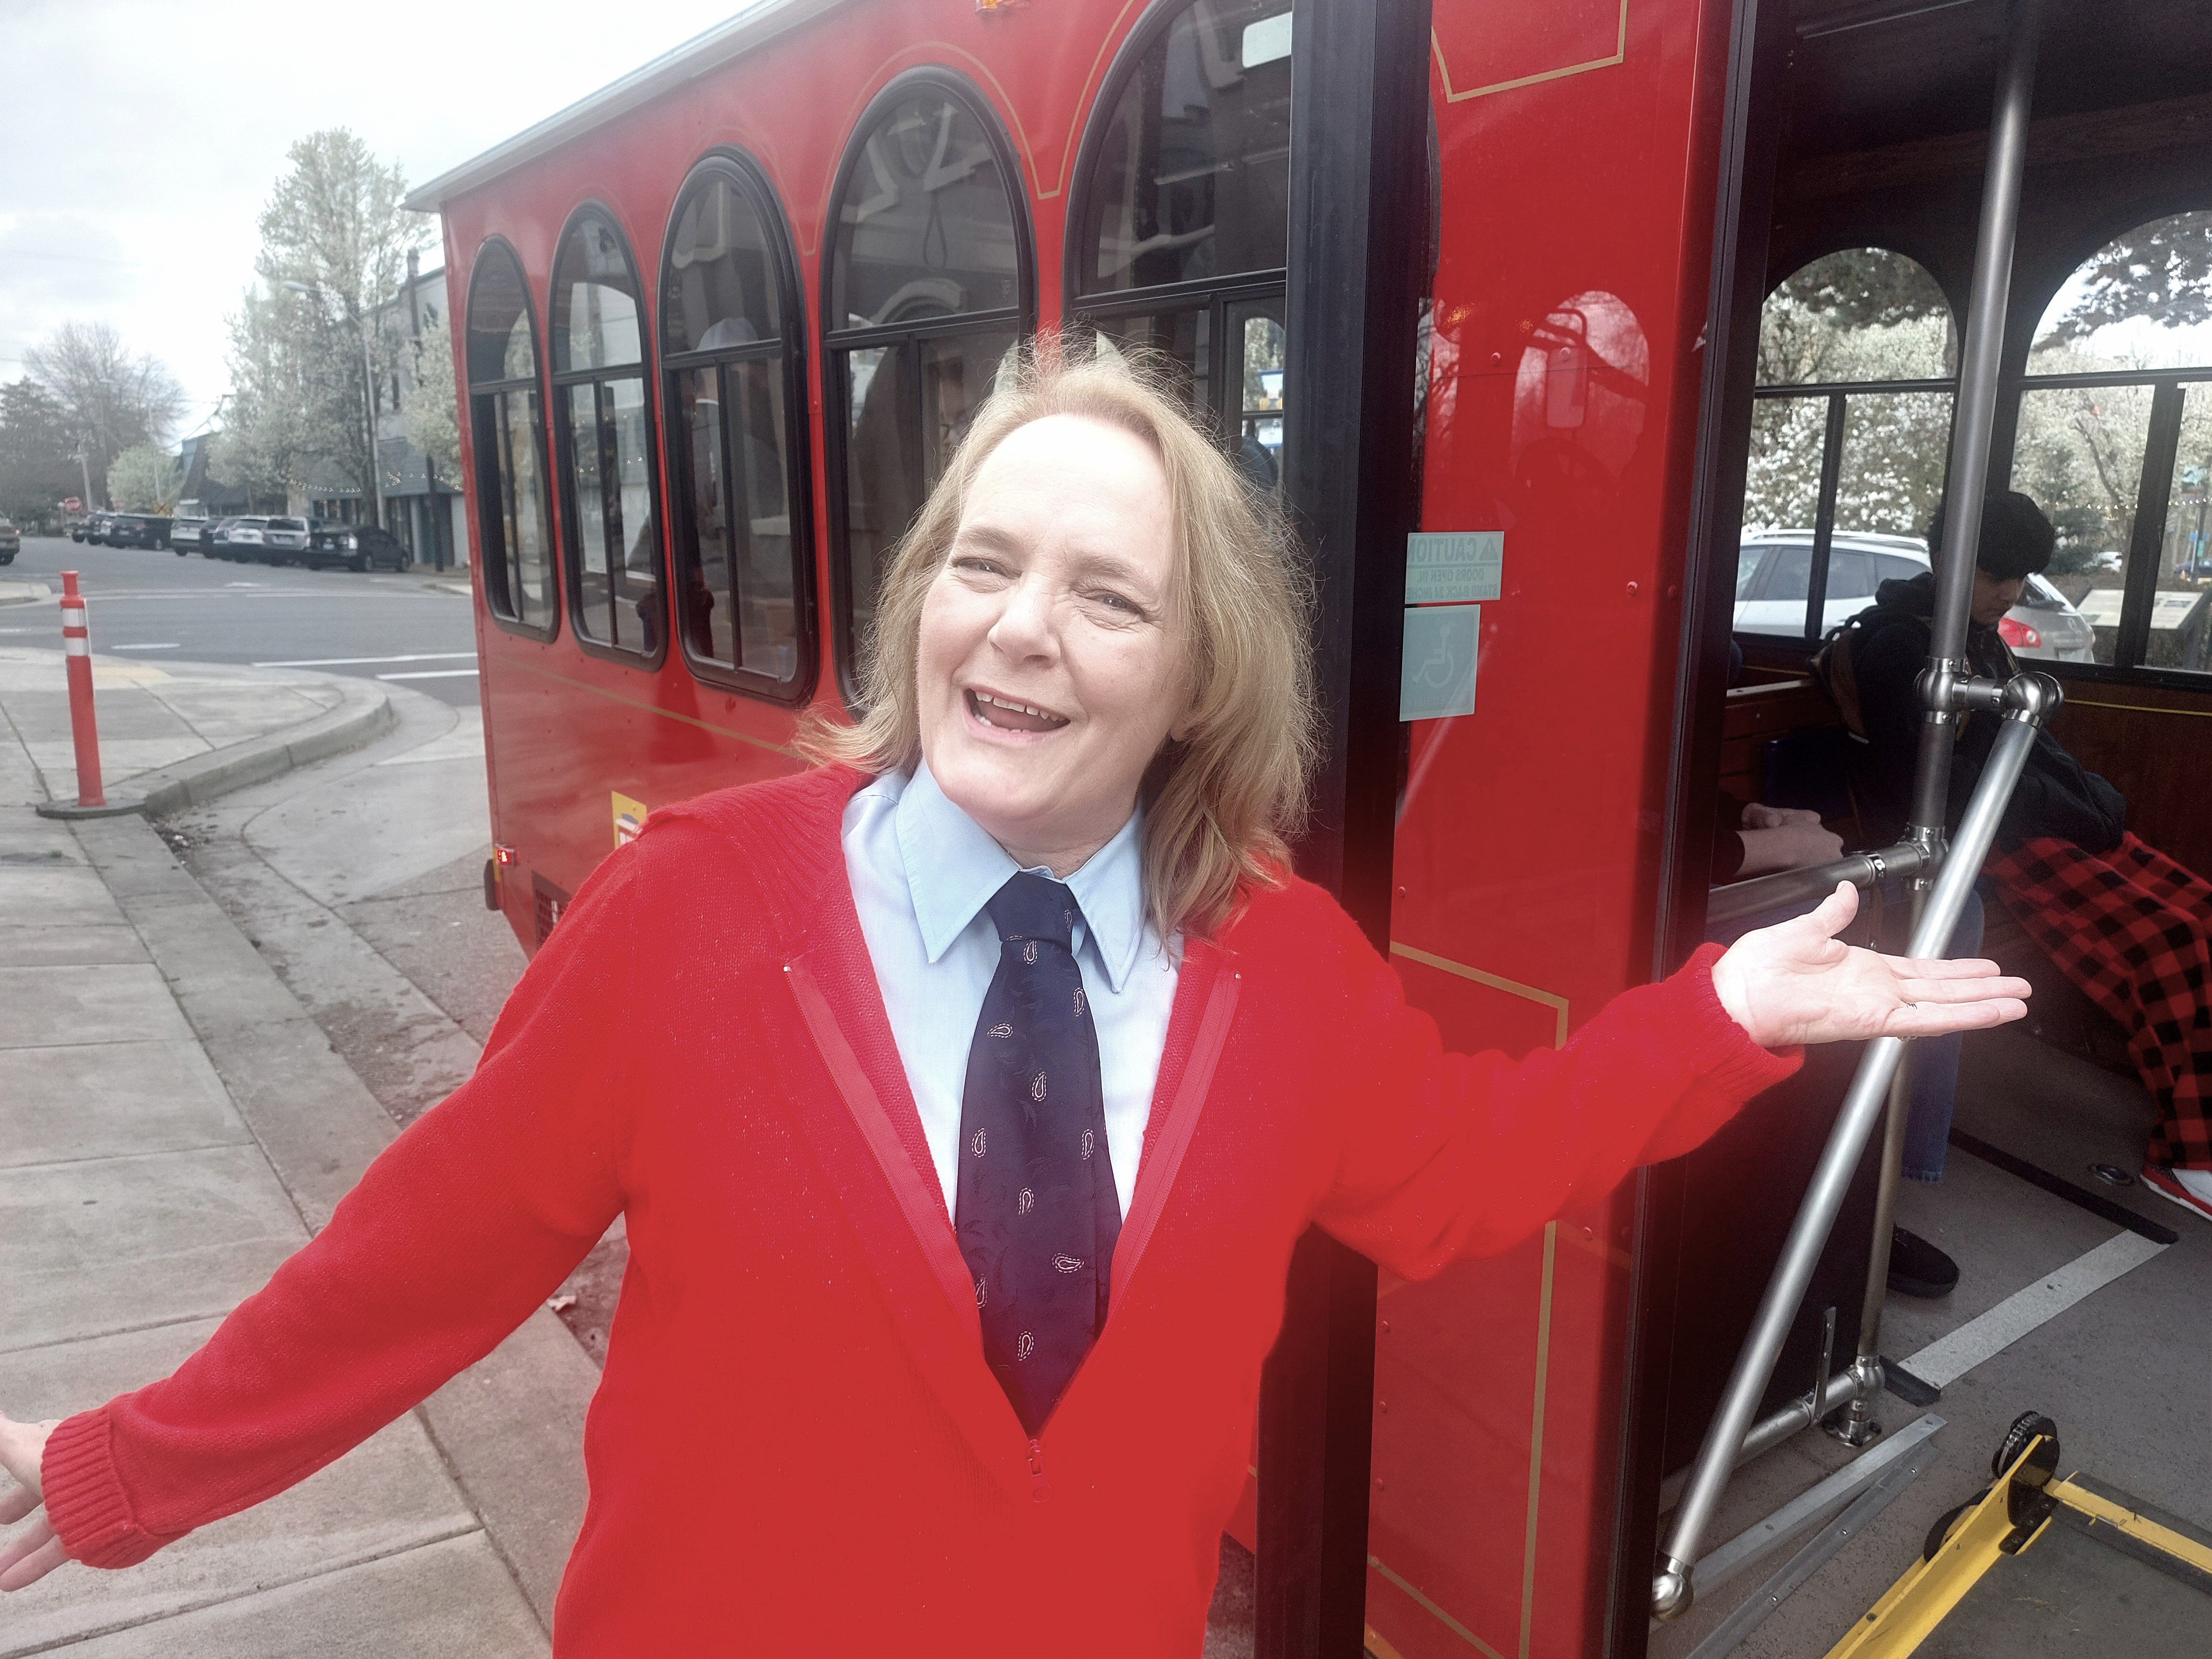 Roxanne Beltz wears a red cardigan sweater and welcomes guests to the red trolley